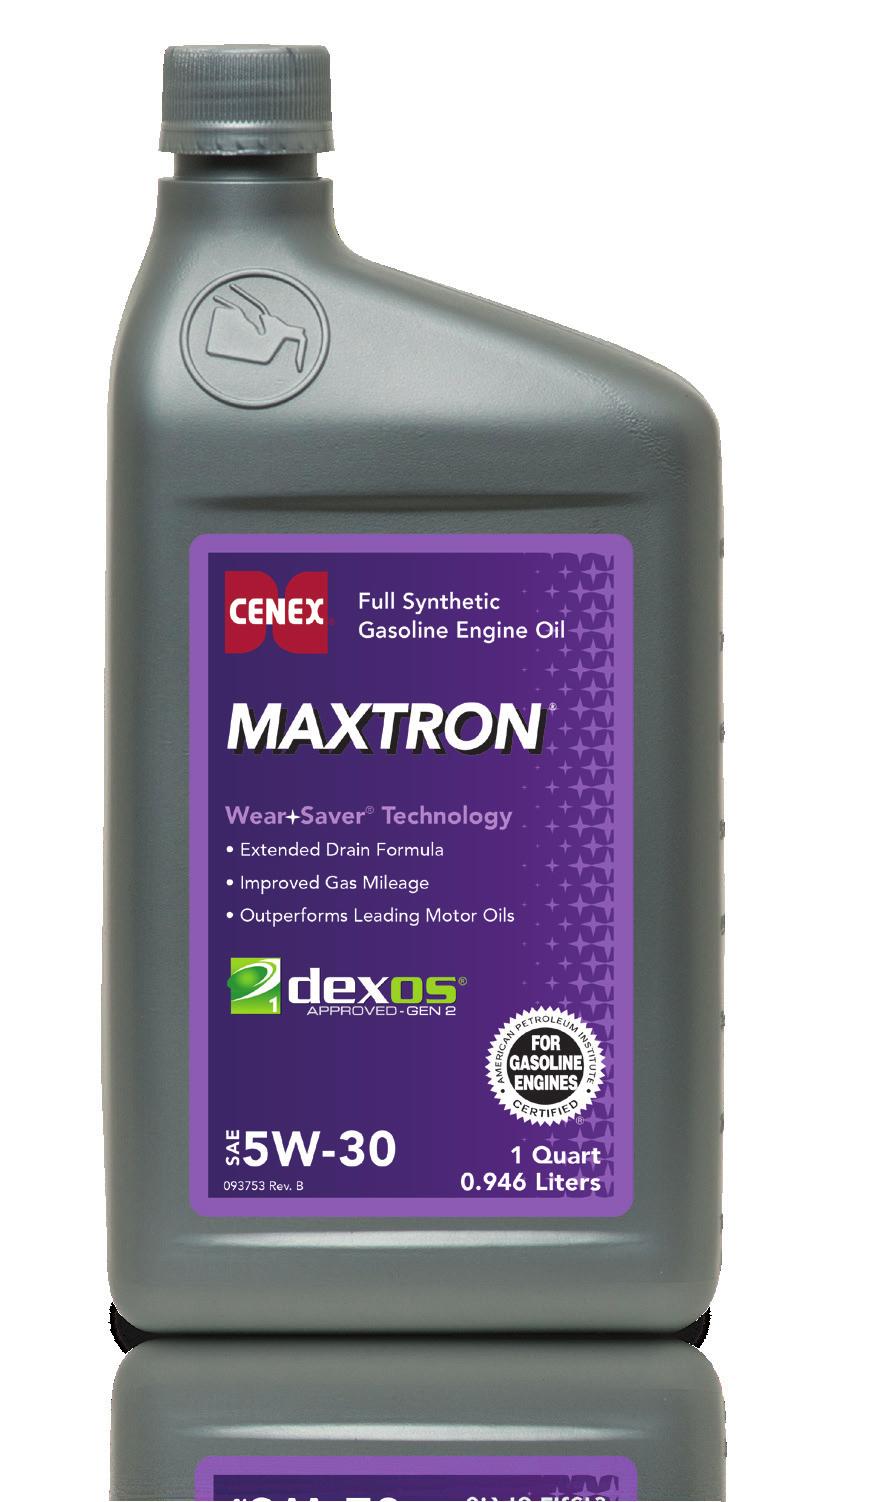 THE CENEX GASOLINE ENGINE OIL ADVANTAGE Maxtron A high performance, full-synthetic engine oil that provides maximum protection, keeping passenger cars, trucks and other gasoline-powered equipment